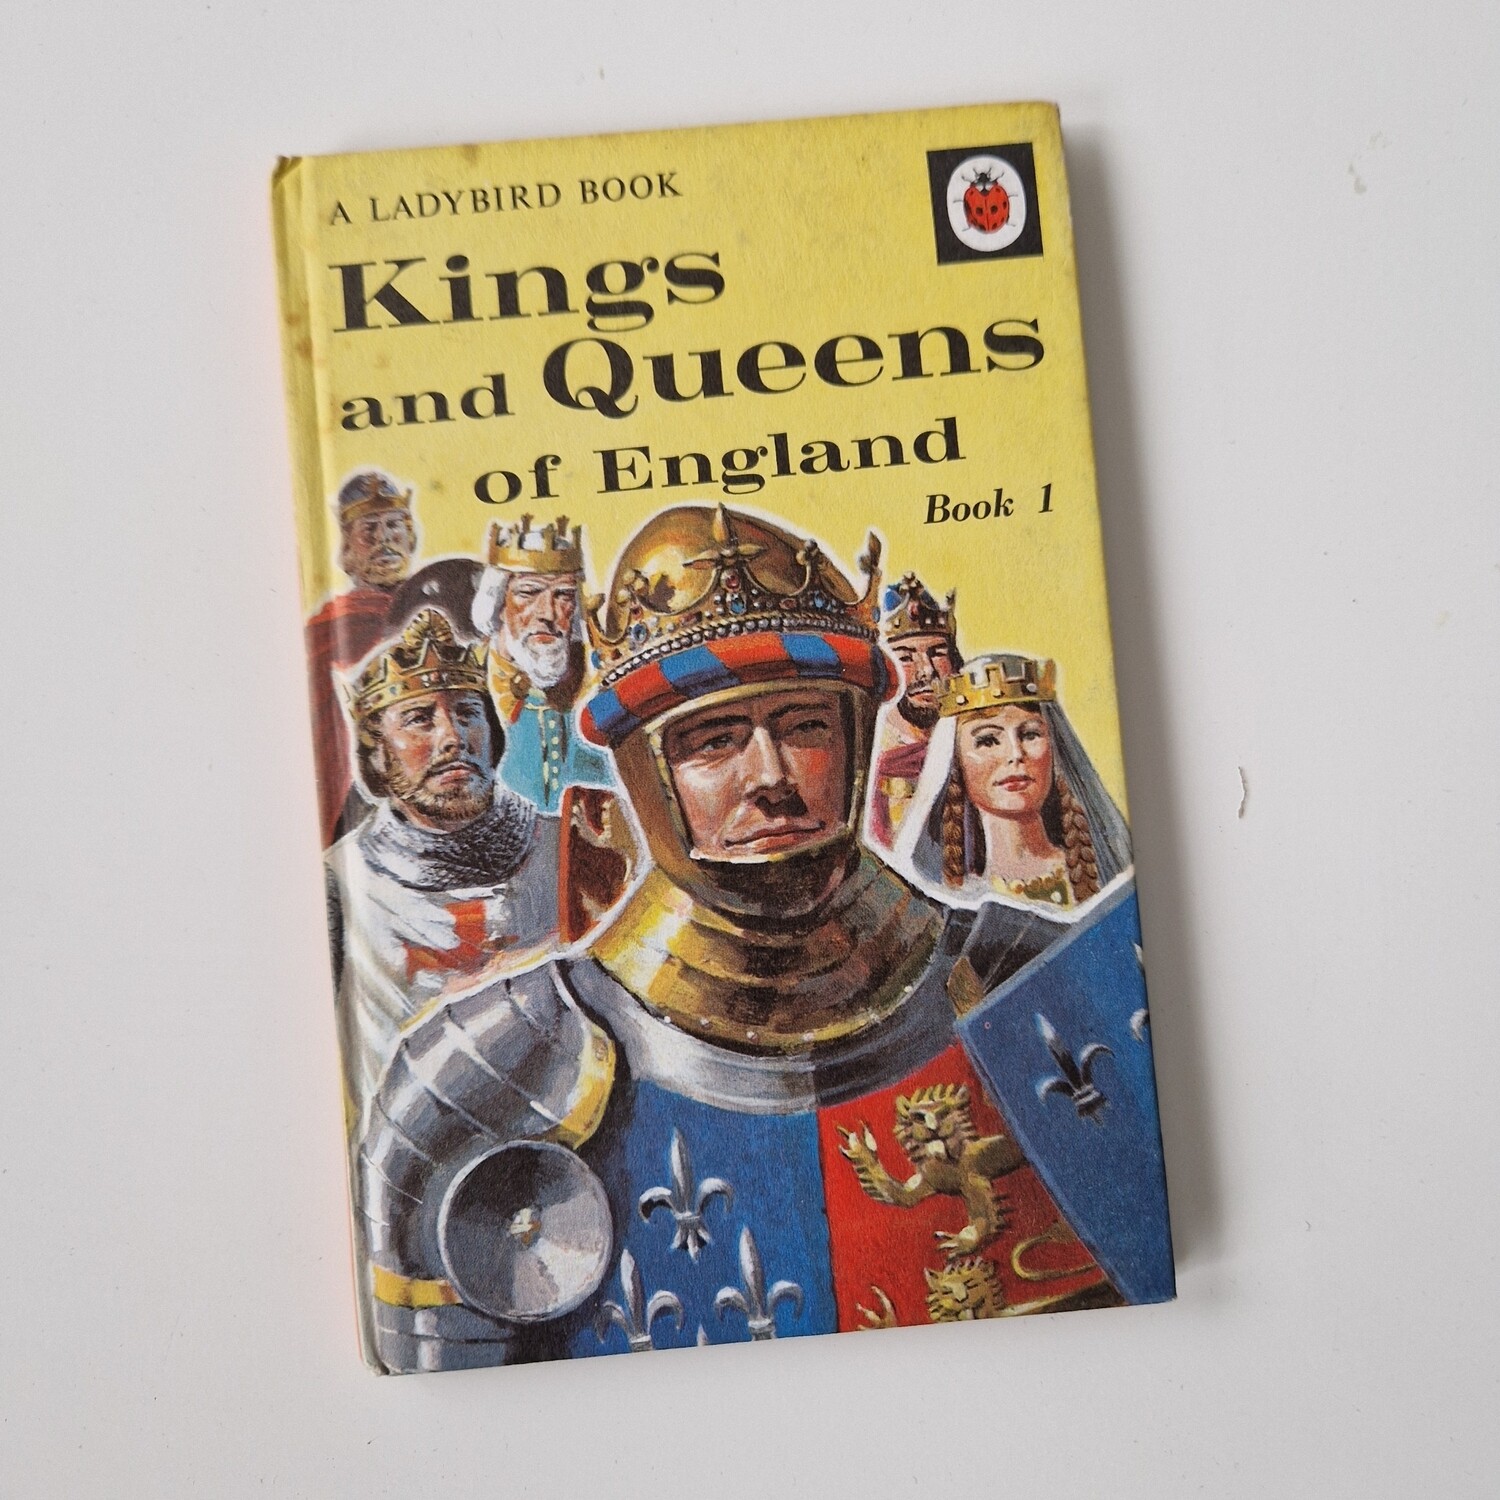 Kings and Queens of England Notebook - Ladybird book